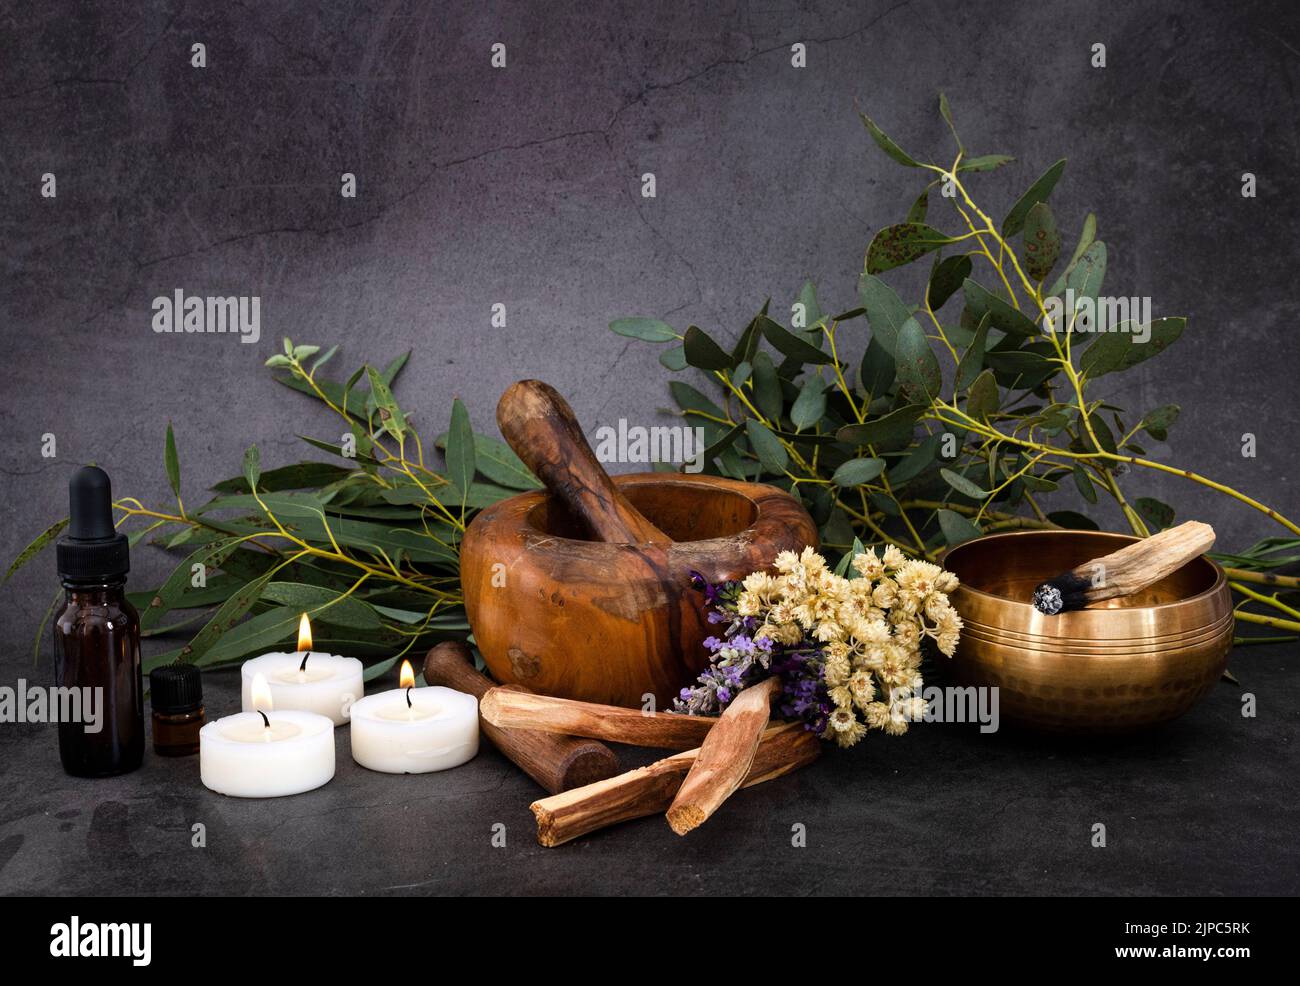 palo santo and mortars in front of dark background Stock Photo